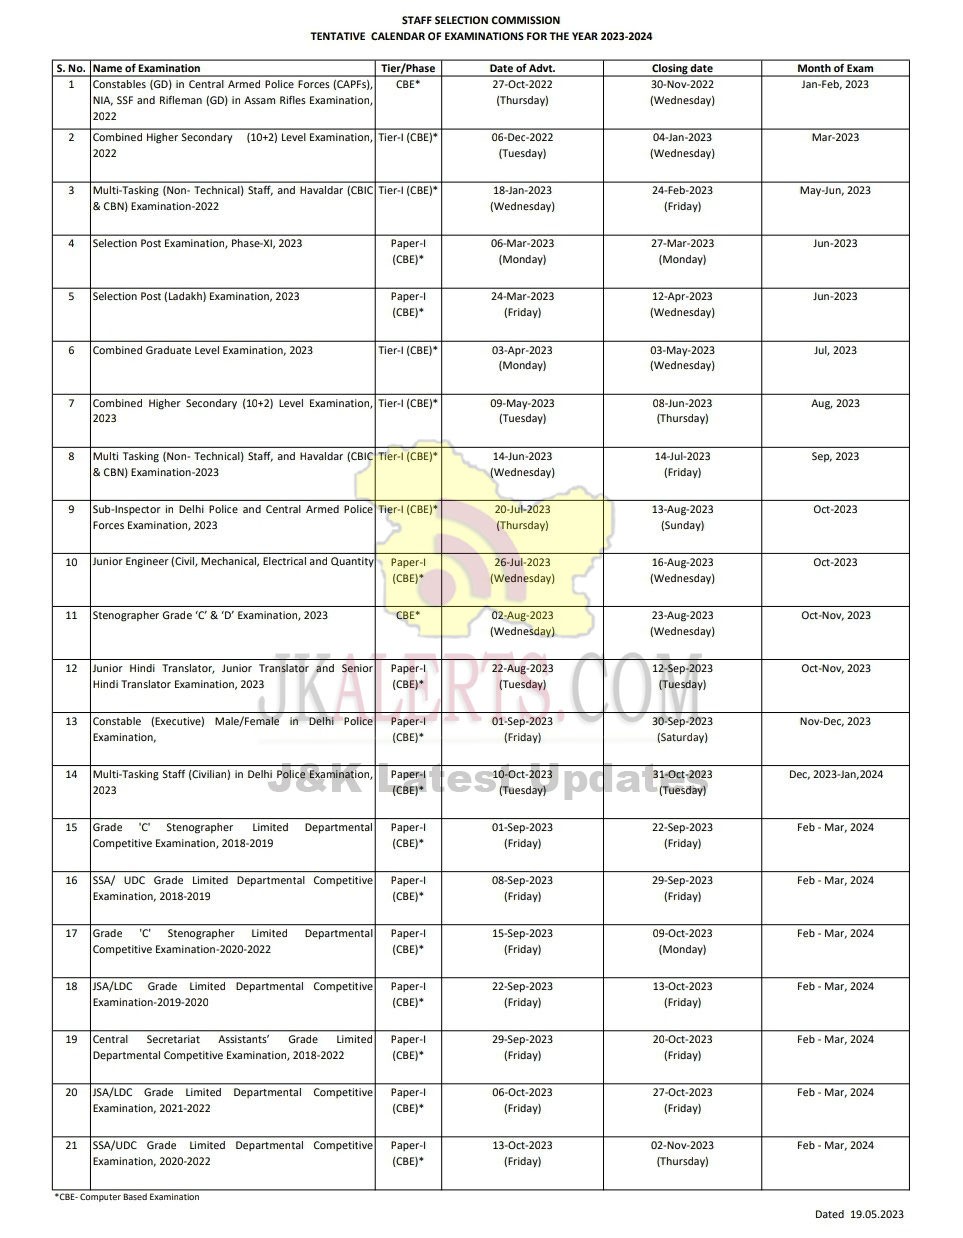 ssc-revised-calendar-of-exams-for-the-year-2023-2024